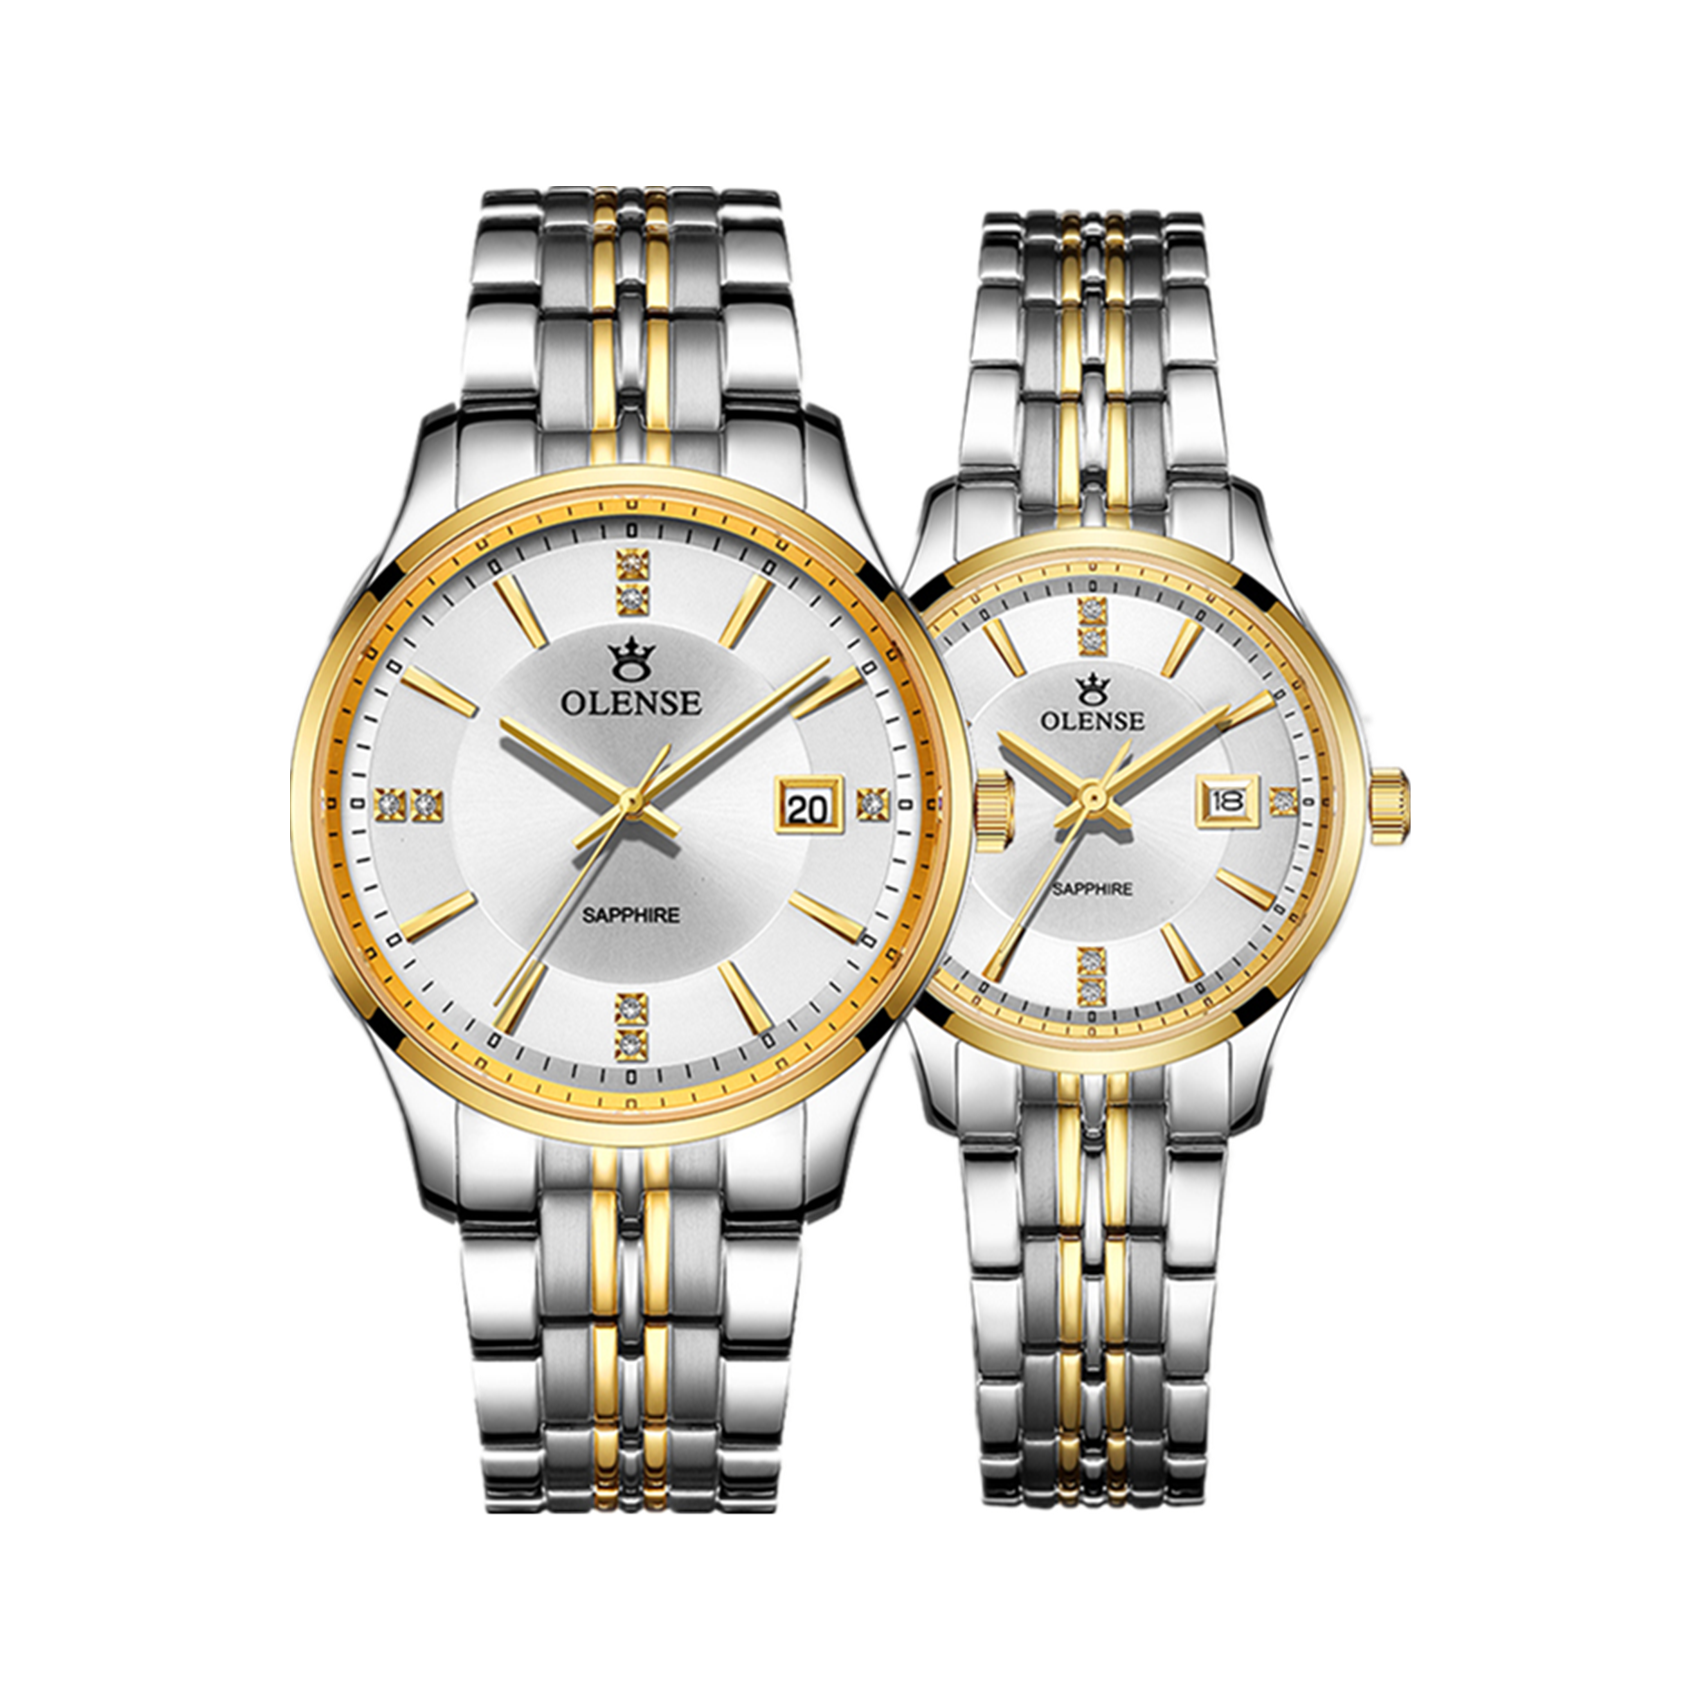 OLENSE - Luxury Couple Watch, His & Her Sets, Lover Gift, Silver & Gold